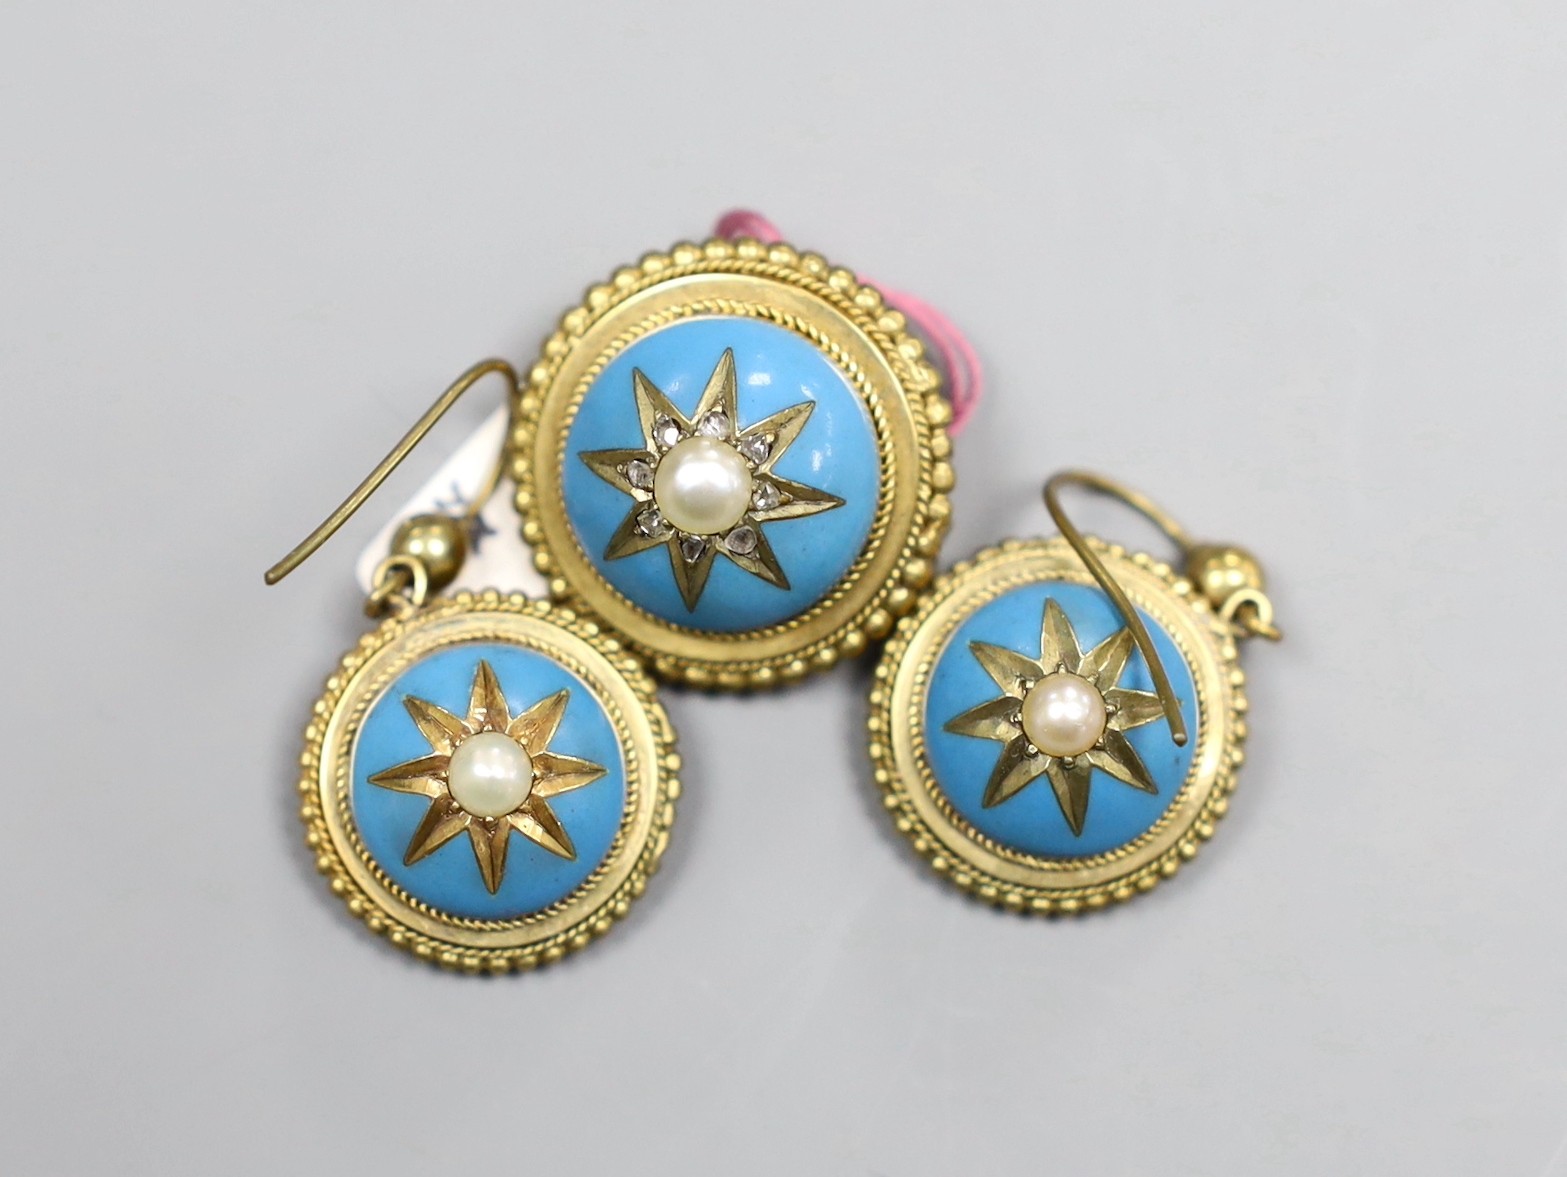 A Victorian 15ct gold pearl, blue enamel and diamond chip set target brooch, with a pair of near matching earrings (earrings lack diamonds), gross 15.9 grams, brooch diameter 2cm